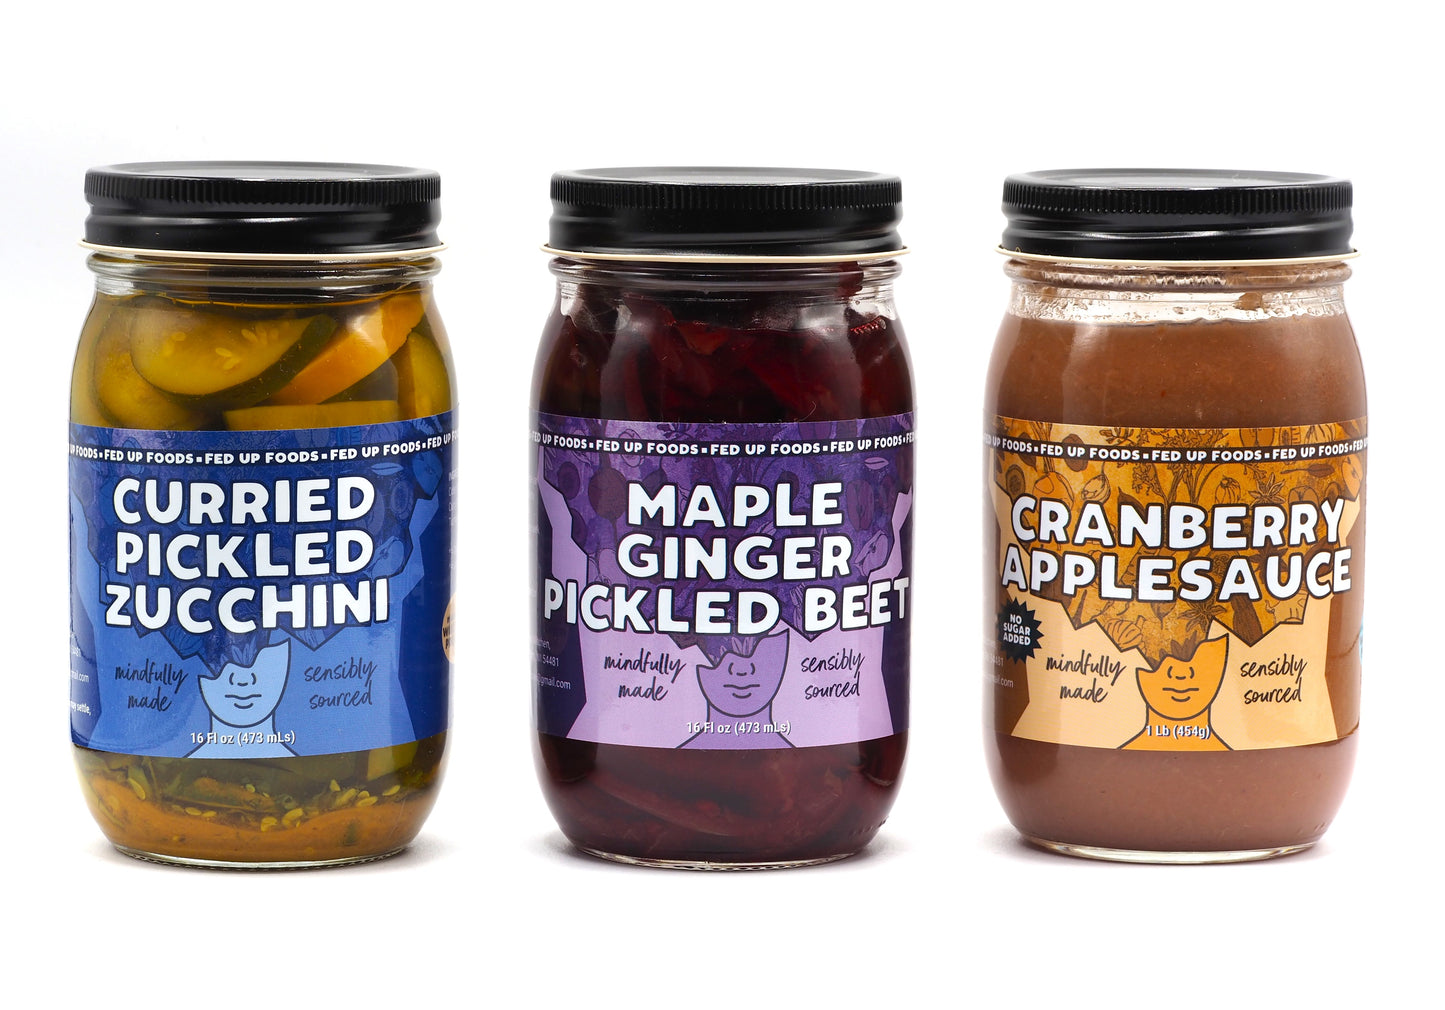 Fed Up Foods curried pickled zucchini cranberry applesauce and maple ginger pickled beet in a 3 pack variety pack